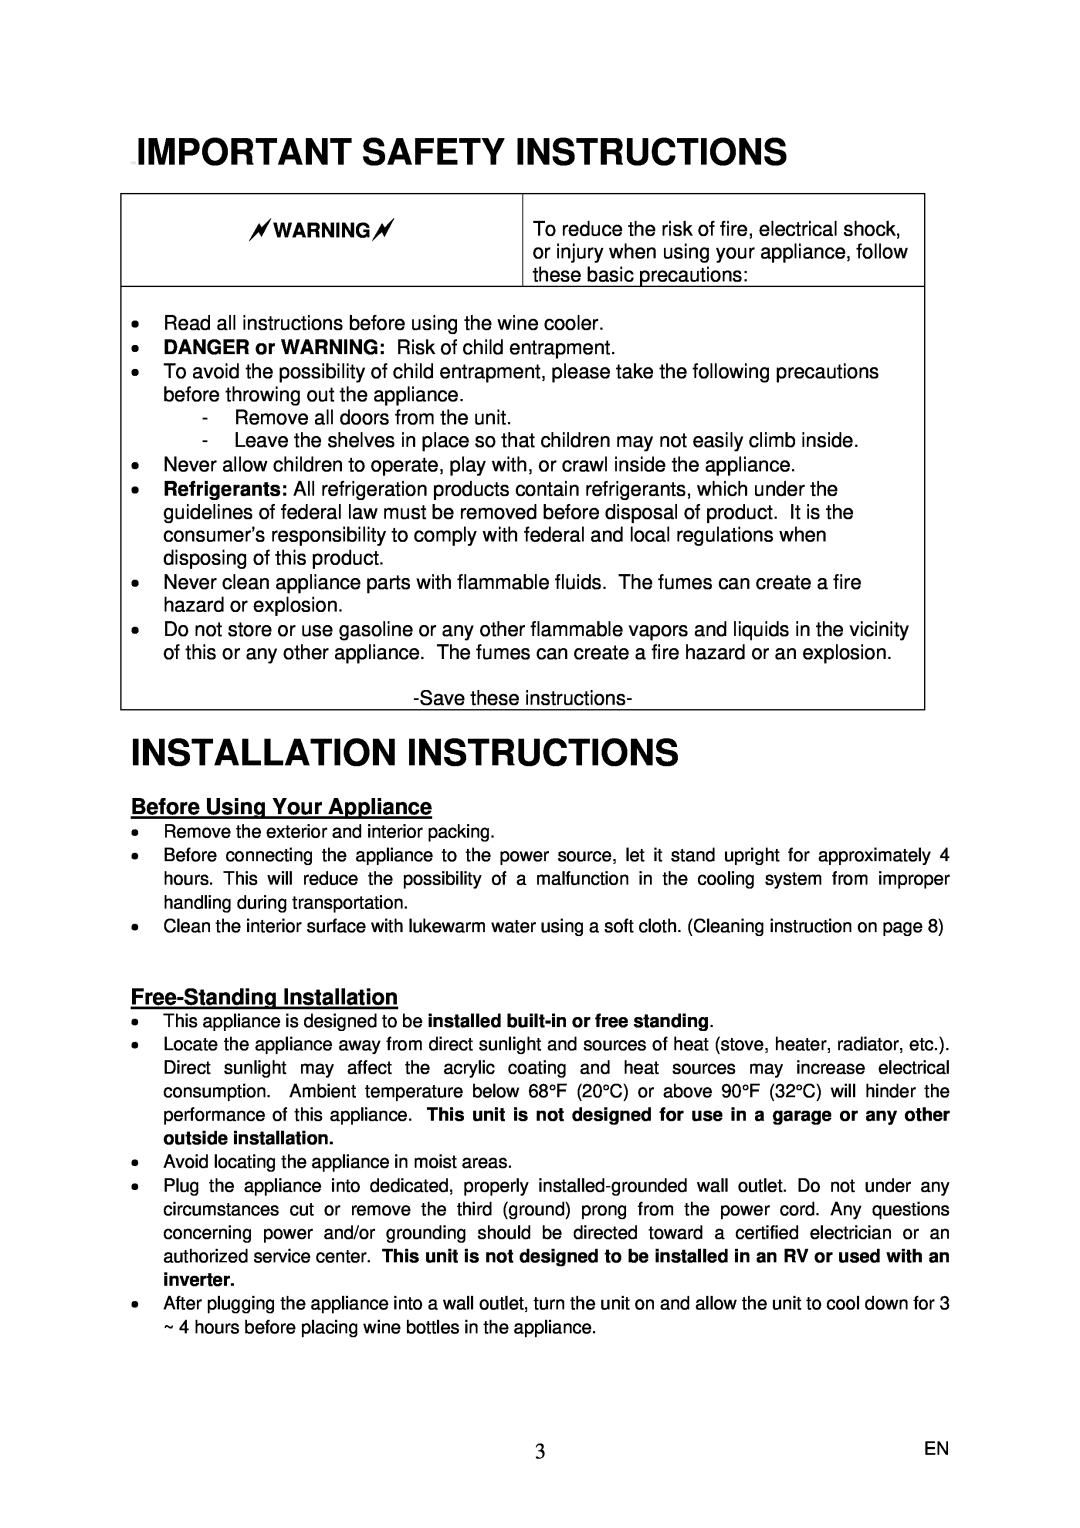 Magic Chef MCWC44DZ Important Safety Instructions, Installation Instructions, Before Using Your Appliance 